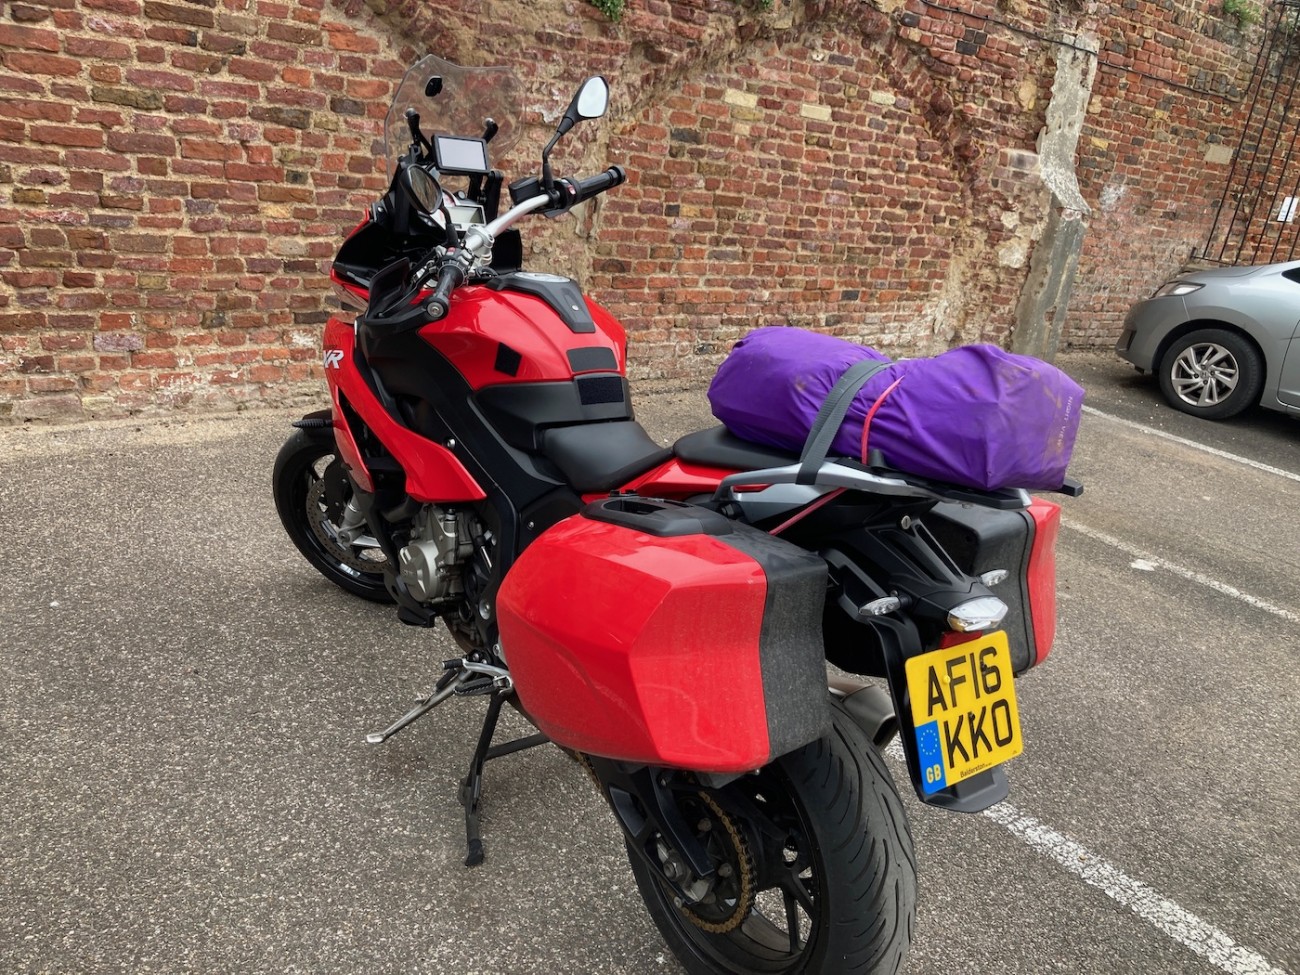 Motorbike packed and ready to go